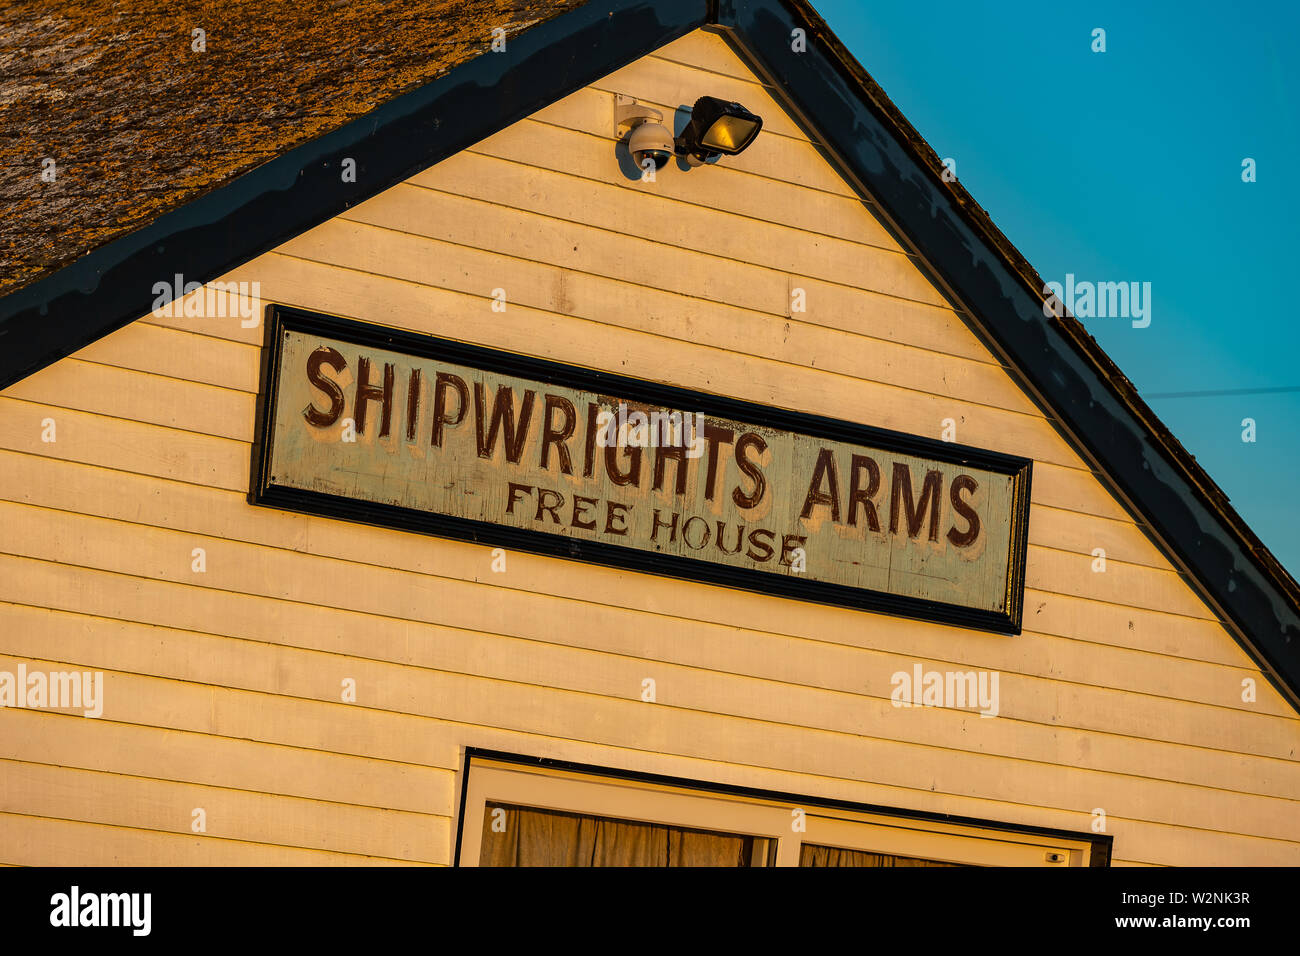 Picture of Shipwrights Arms Free House in Faversham. Stock Photo